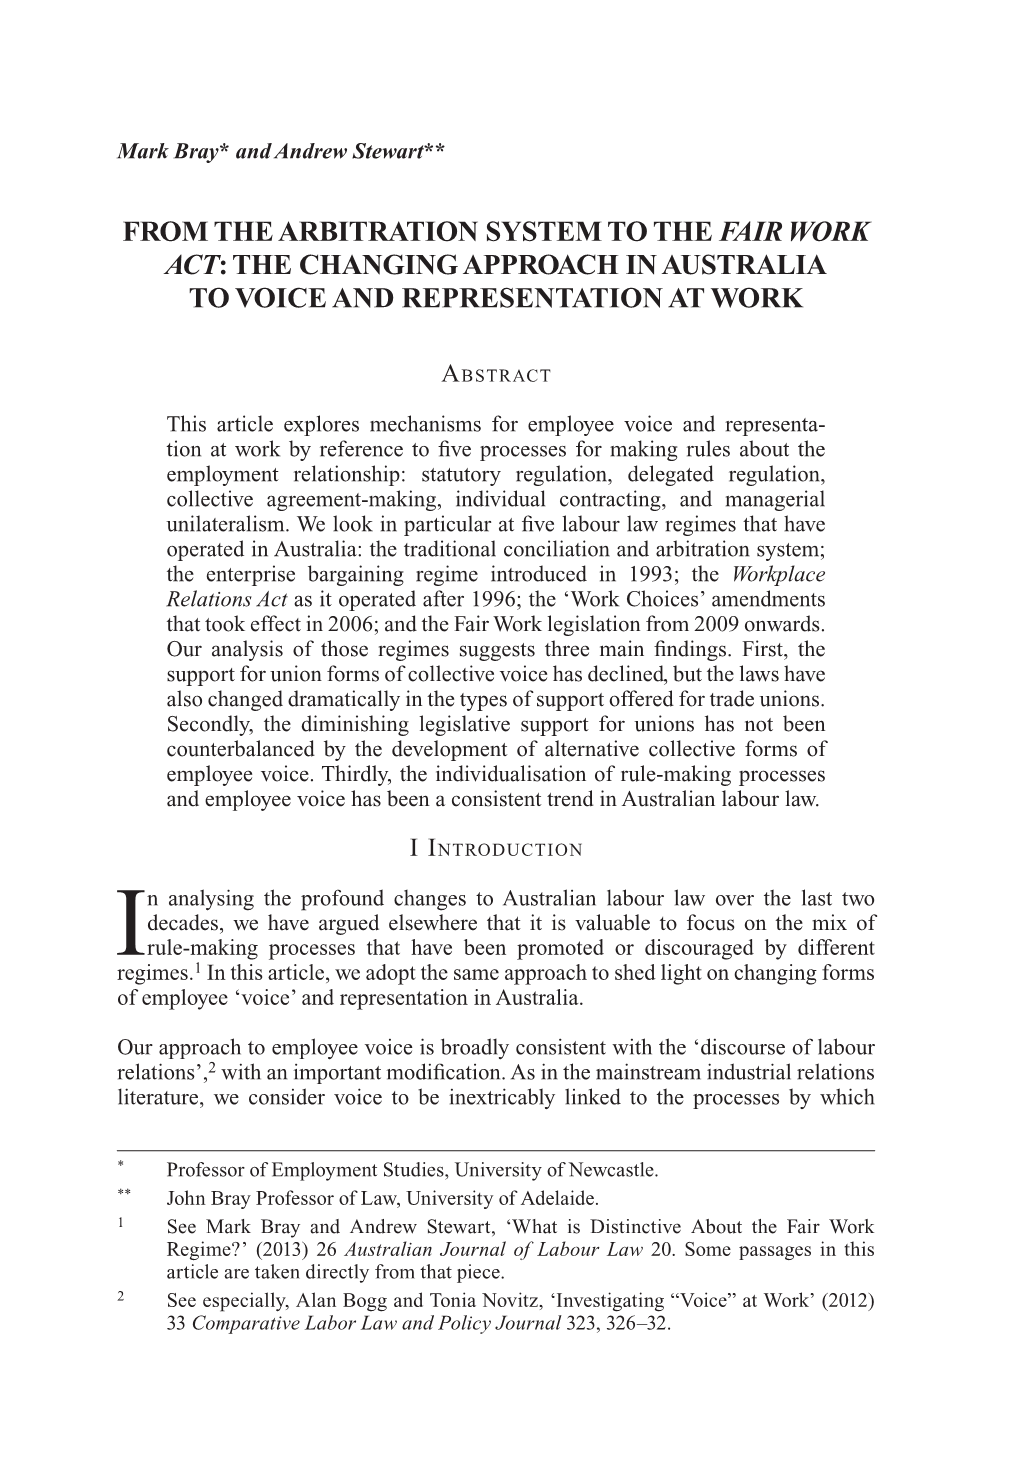 From the Arbitration System to the Fair Work Act: the Changing Approach in Australia to Voice and Representation at Work